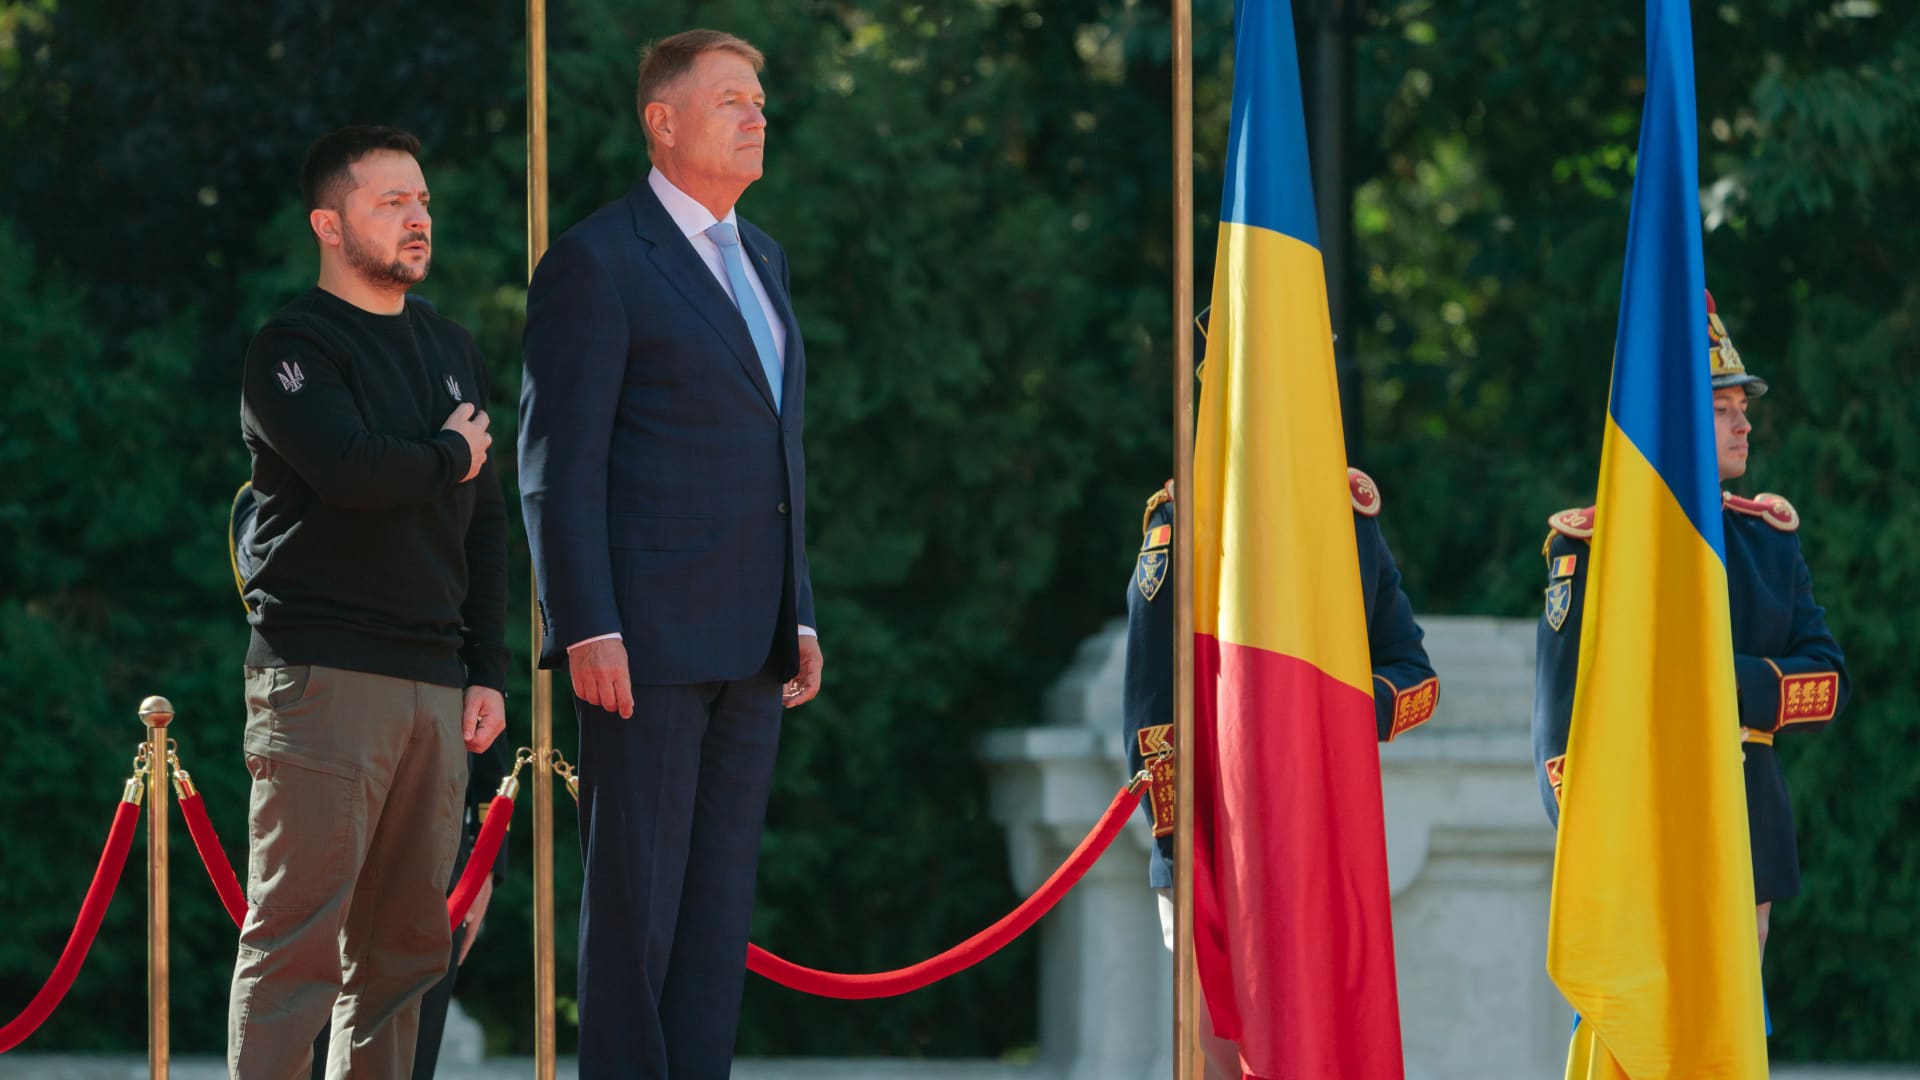 Volodymyr Zelenskyy, Ukraine's president, left, and Klaus Iohannis, Romania's president, at the Cotroceni presidential palace in Bucharest, Romania, on Tuesday, Oct. 10, 2023. The leaders planned to discuss defense cooperation between their countries and the issue of Black Sea security.